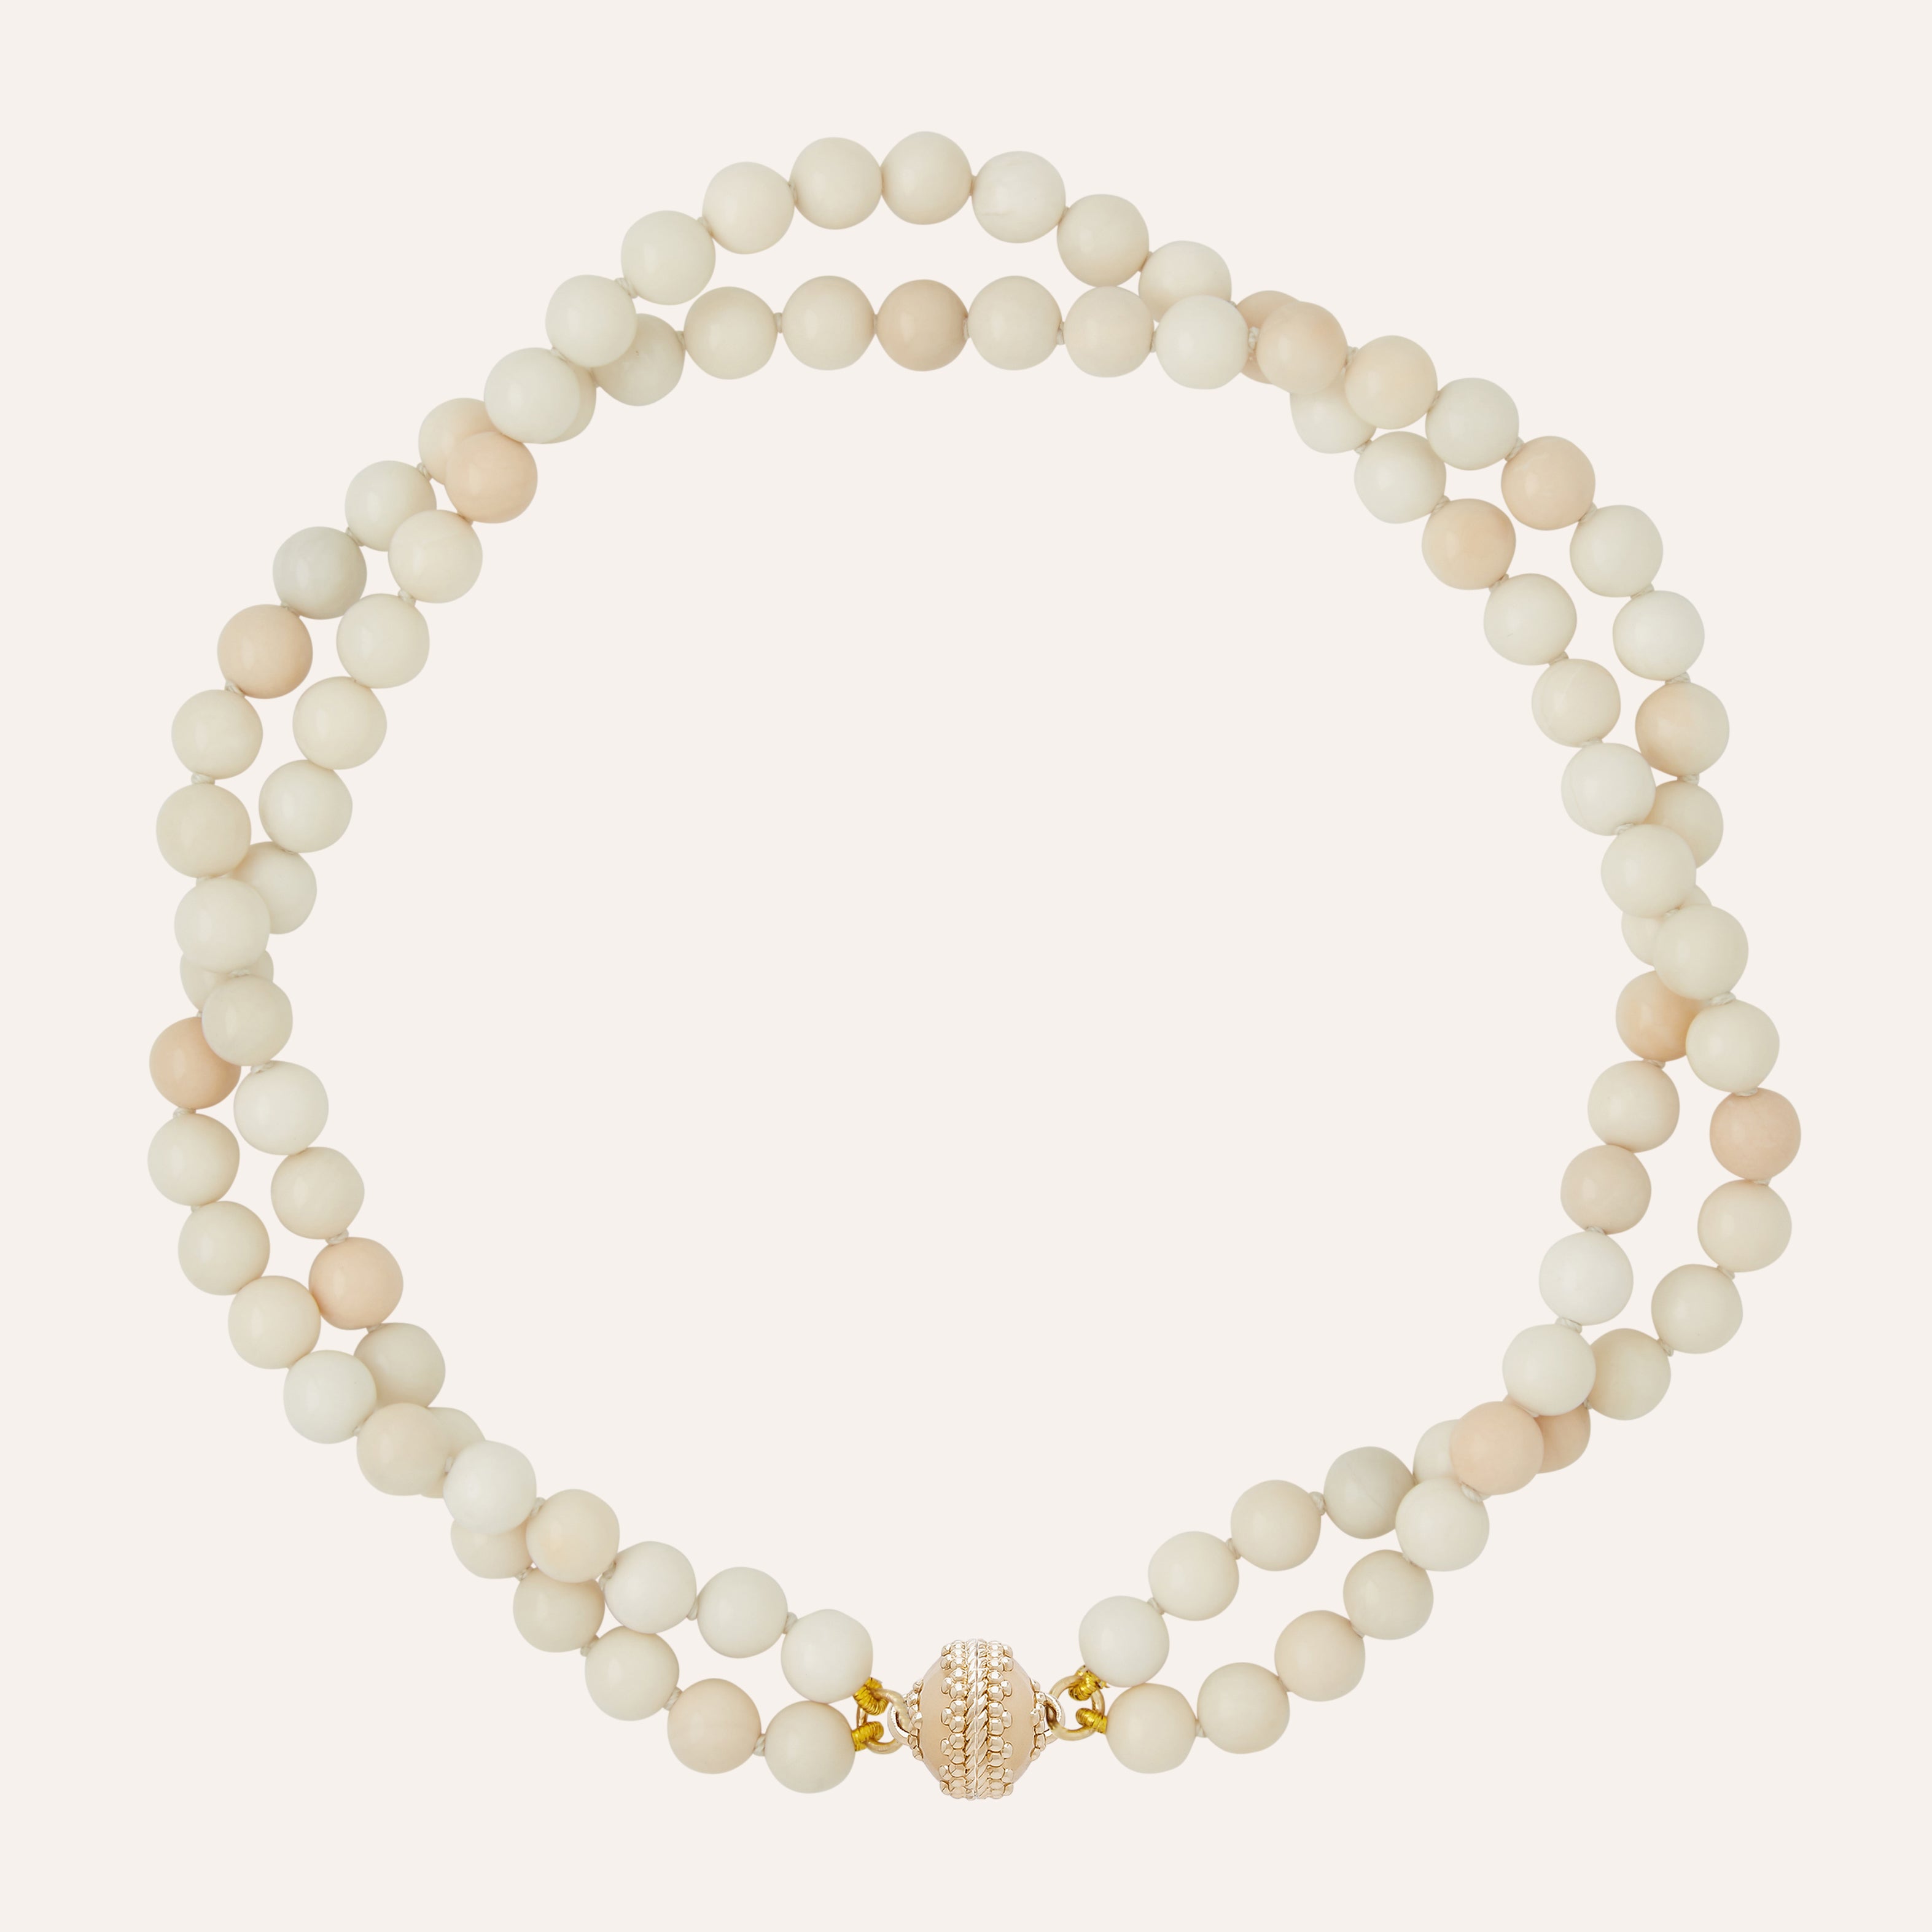 Victoire Ivory Jade 8mm Double Strand Necklace